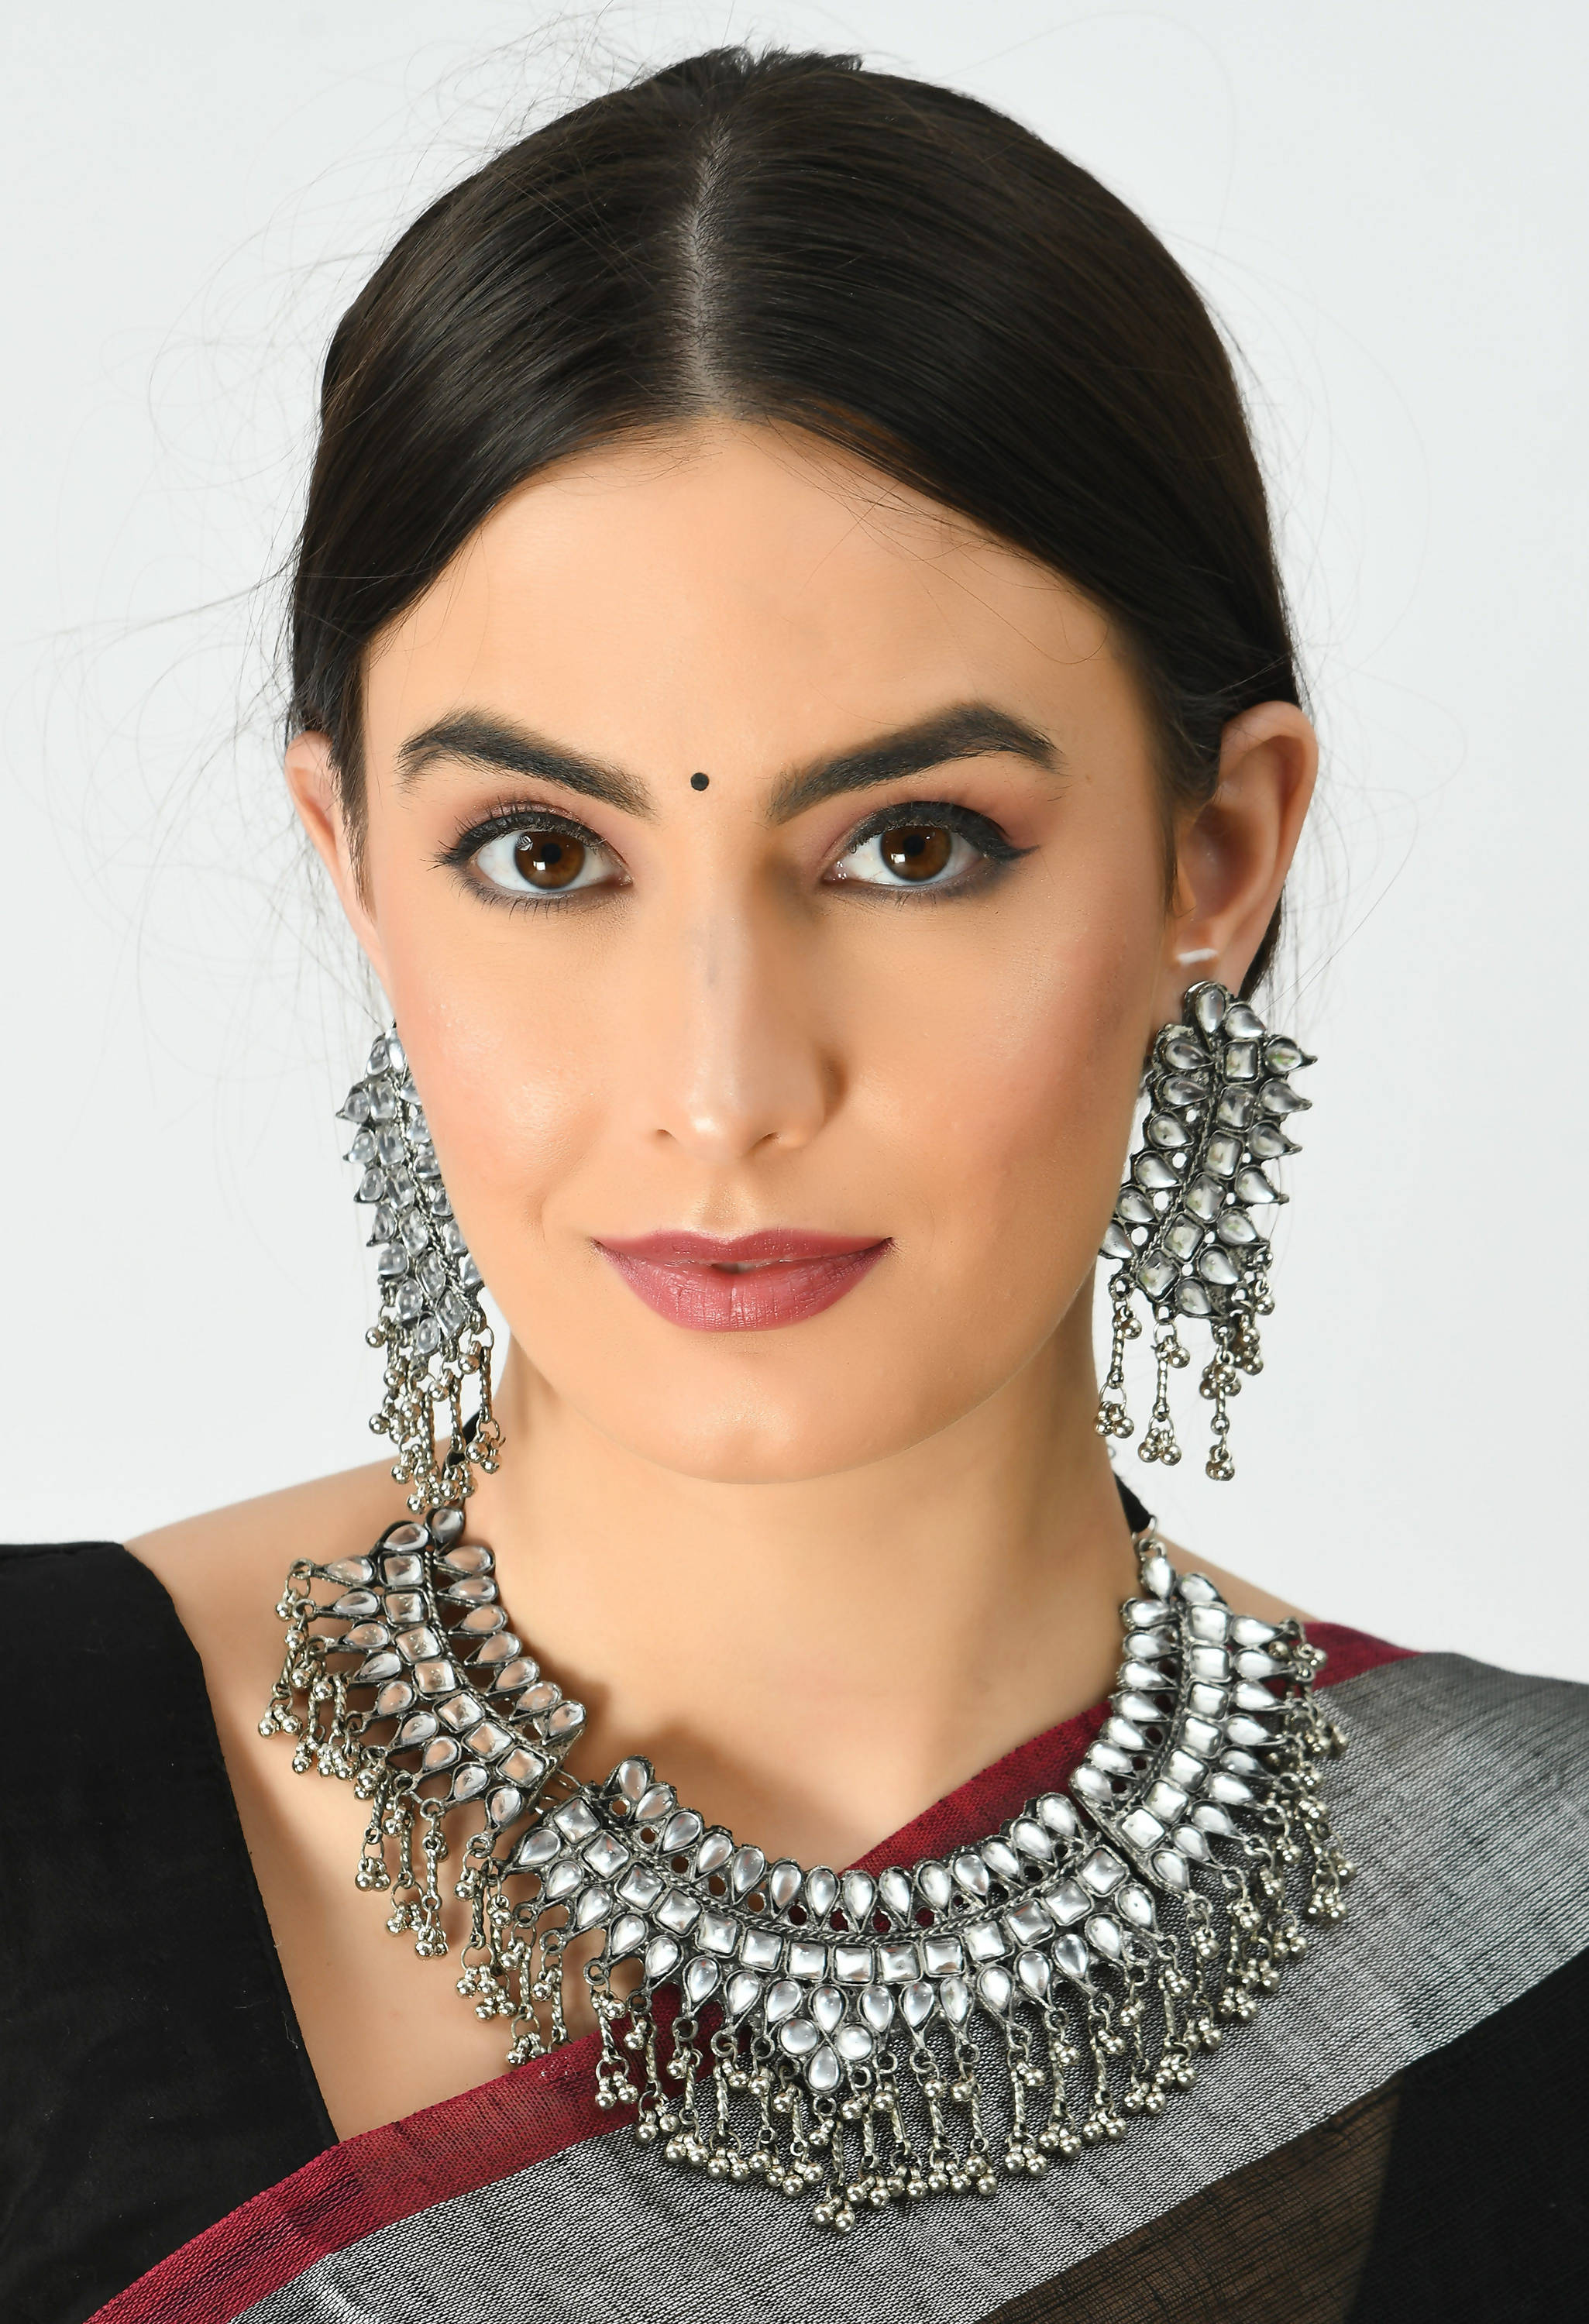 Kamal Johar Silver-Plated Kundan Necklace with Earrings white Mangalsutra Jkms_084